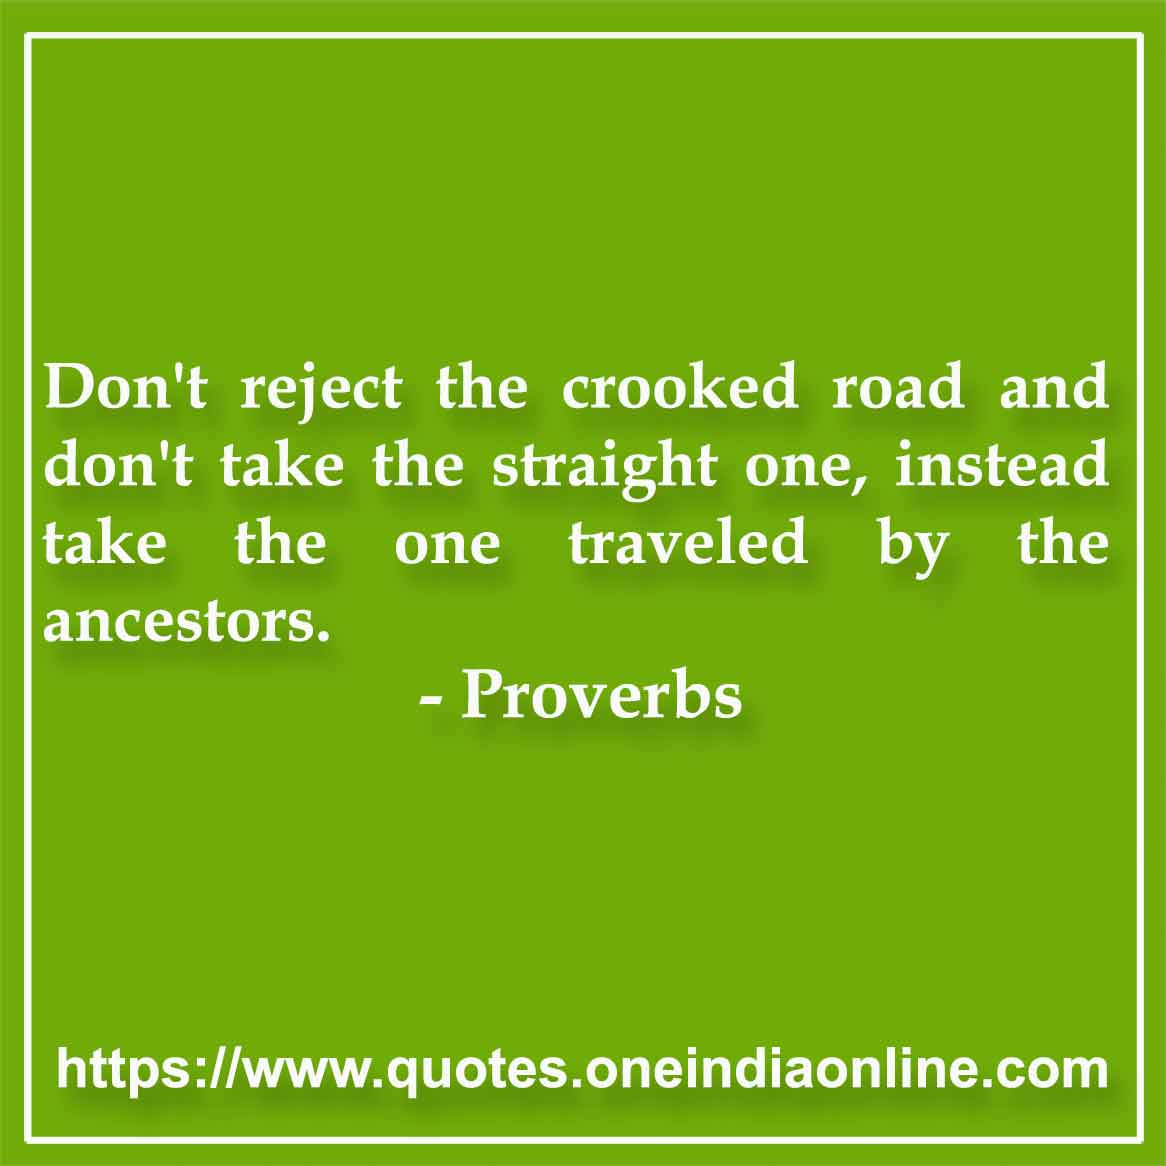 Don't reject the crooked road and don't take the straight one, instead take the one traveled by the ancestors.

Cambodian